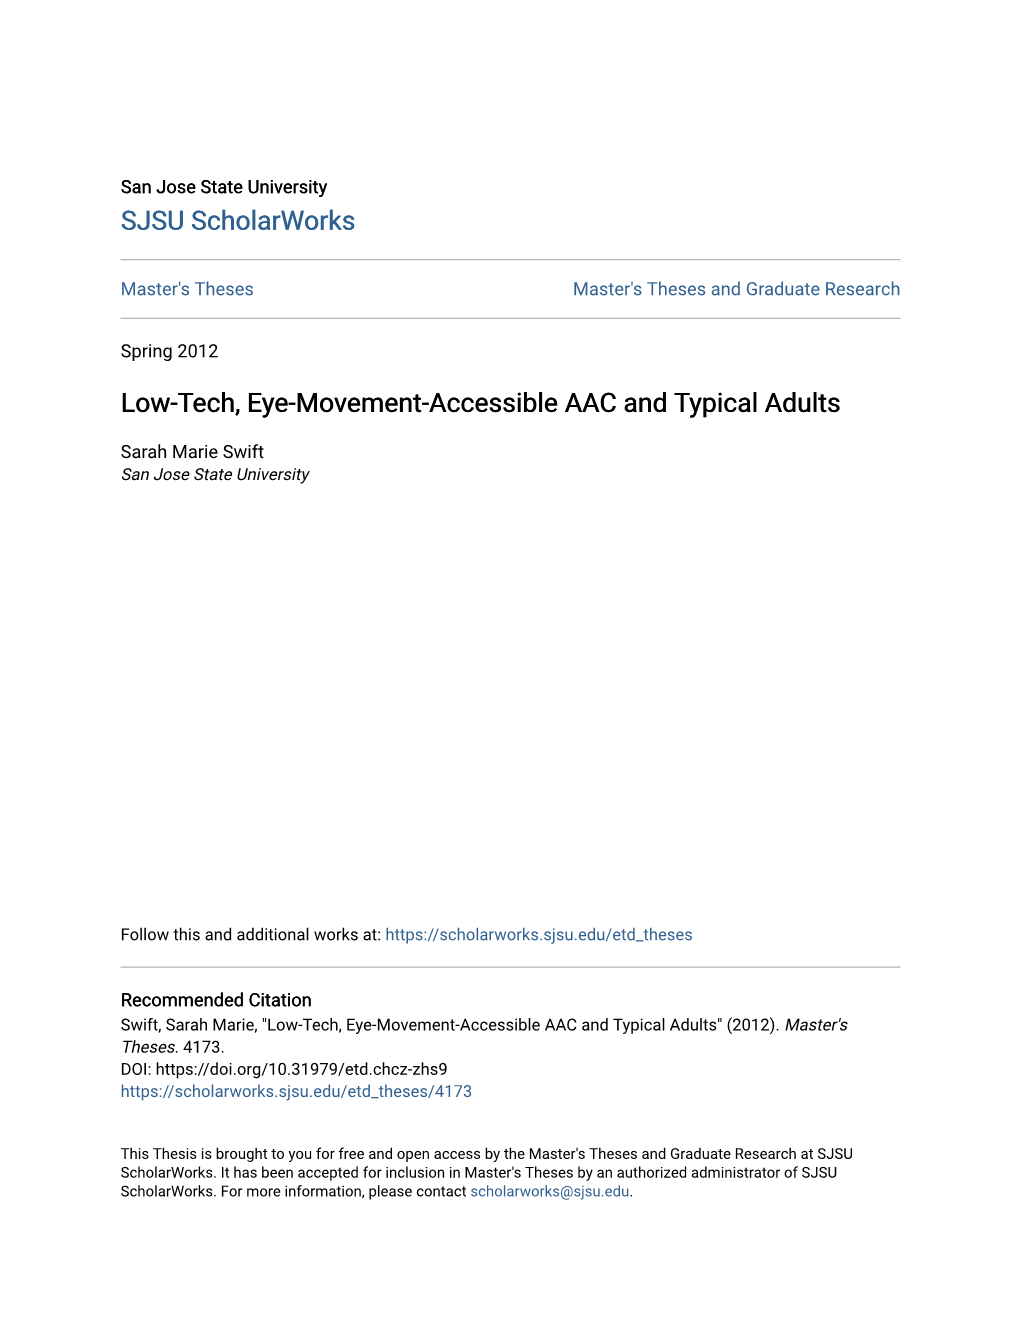 Low-Tech, Eye-Movement-Accessible AAC and Typical Adults